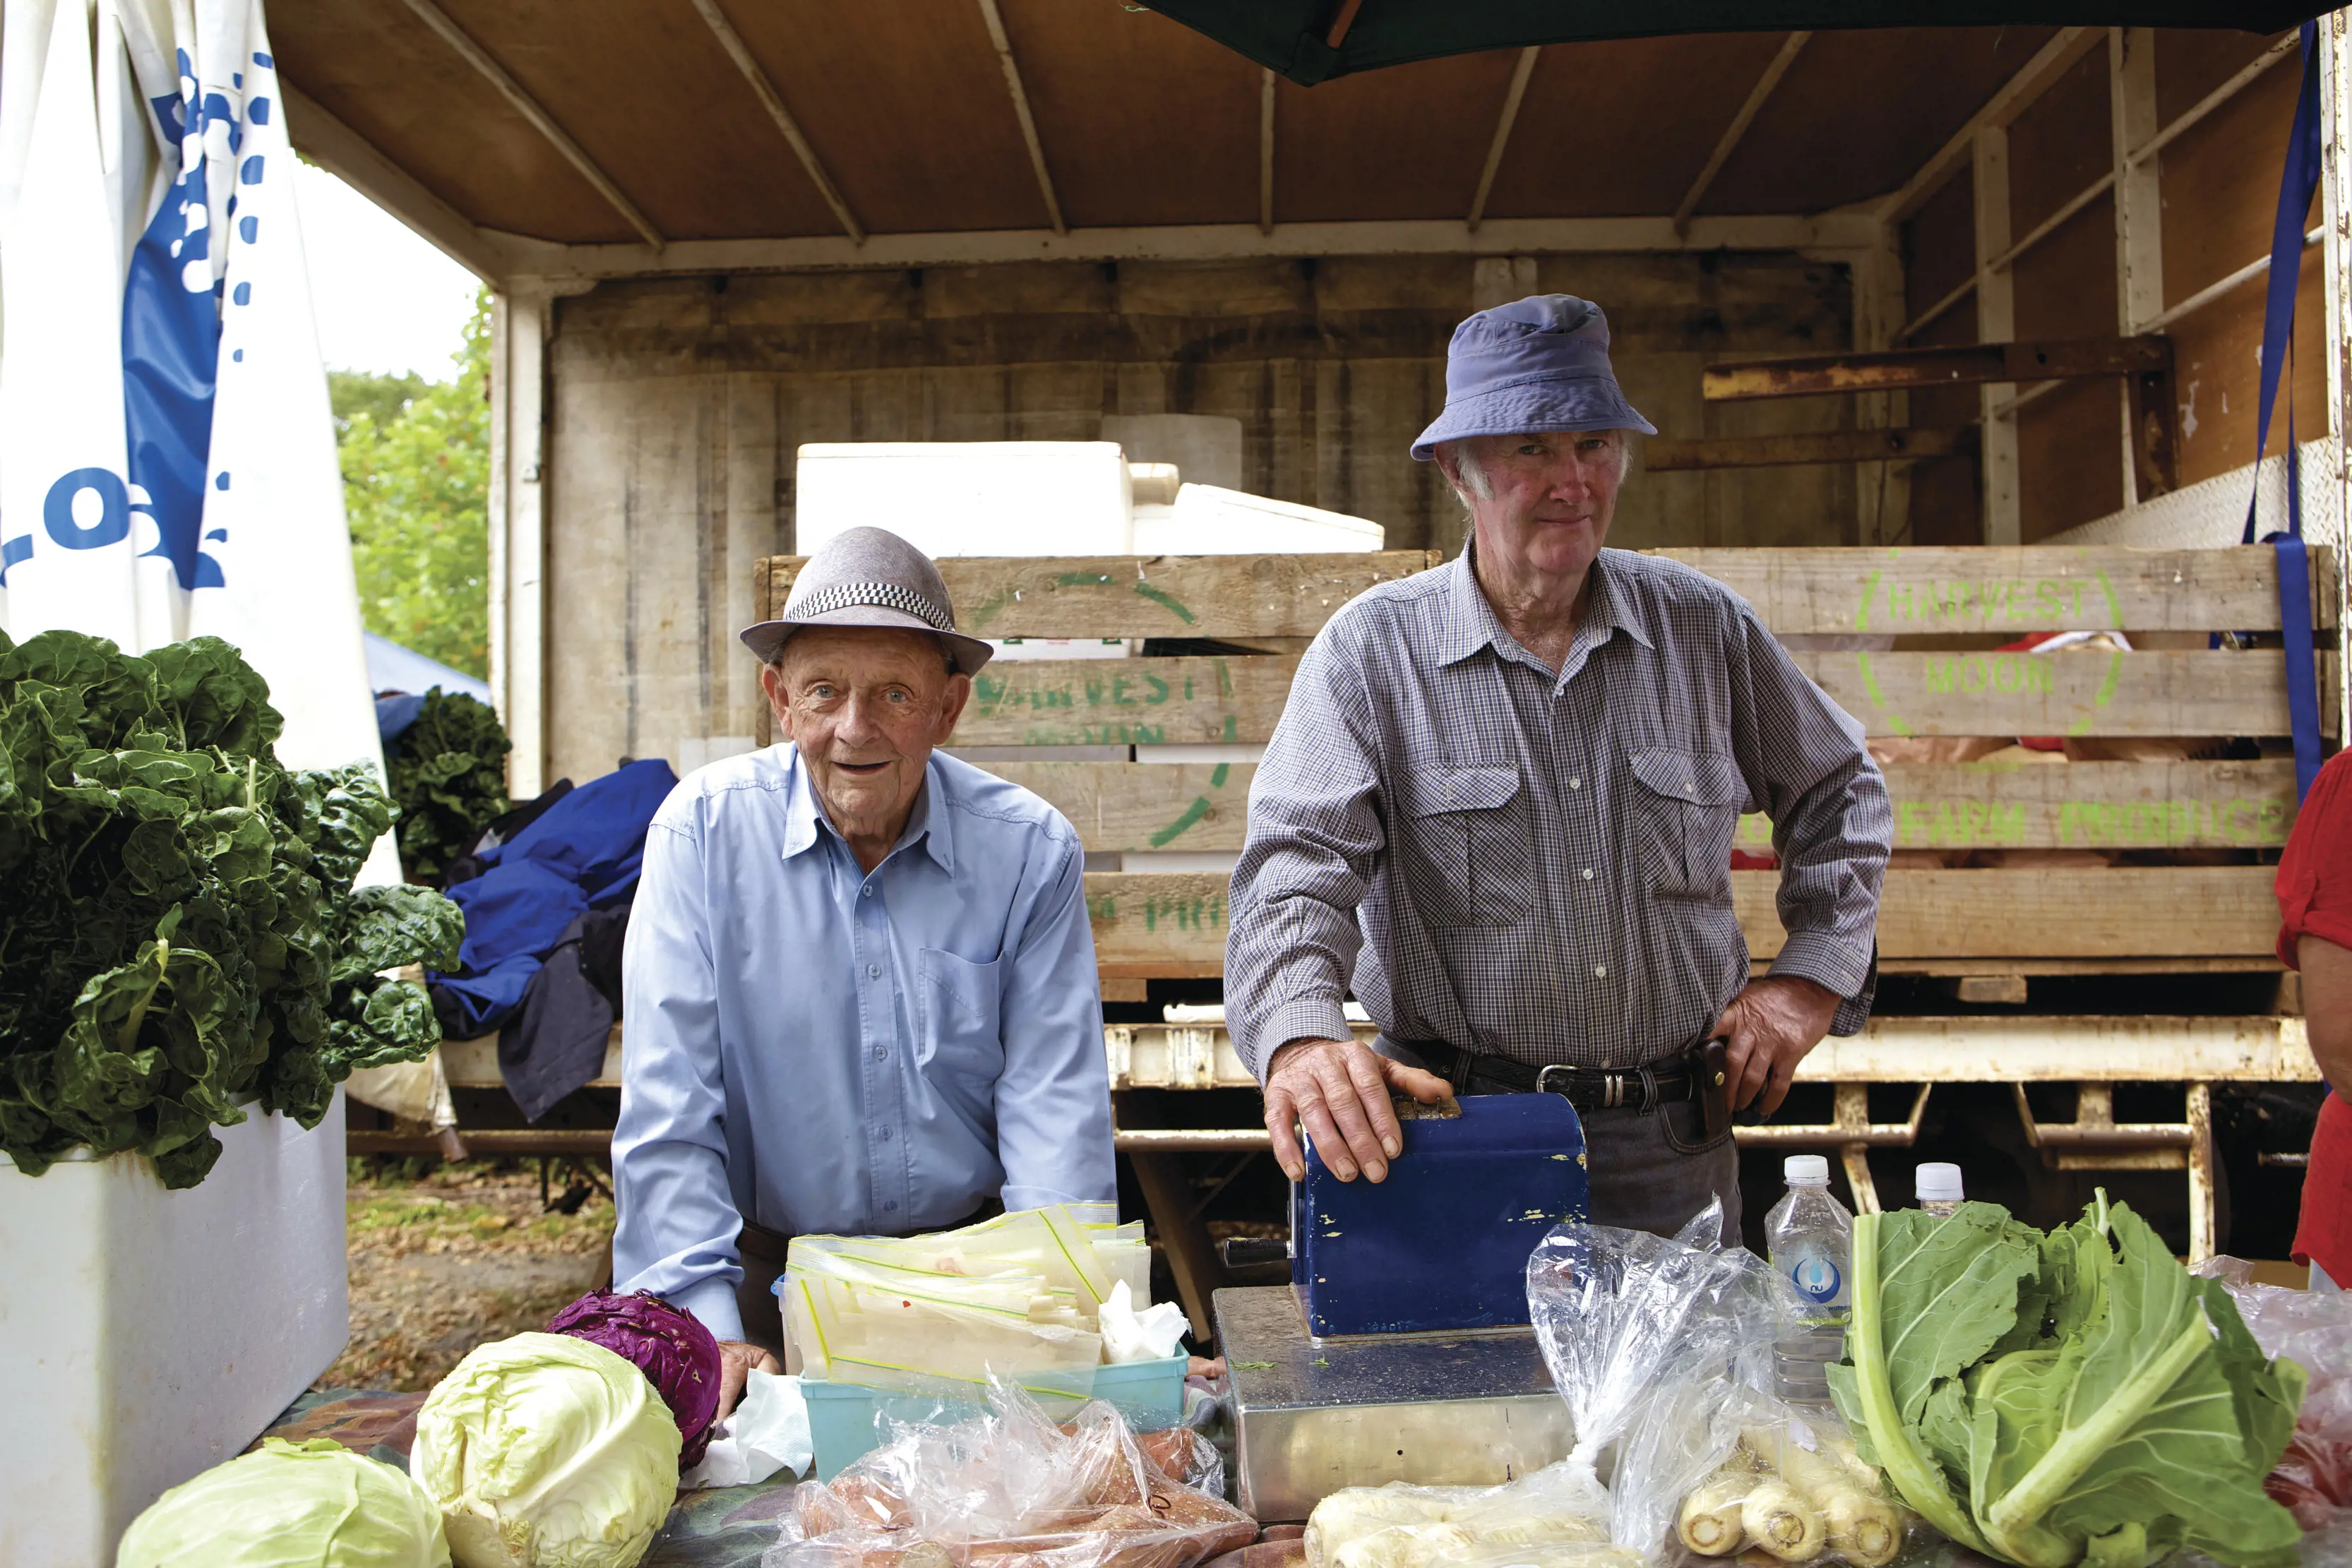 Two friendly local men standing in front of a stall with produce at Evandale market.